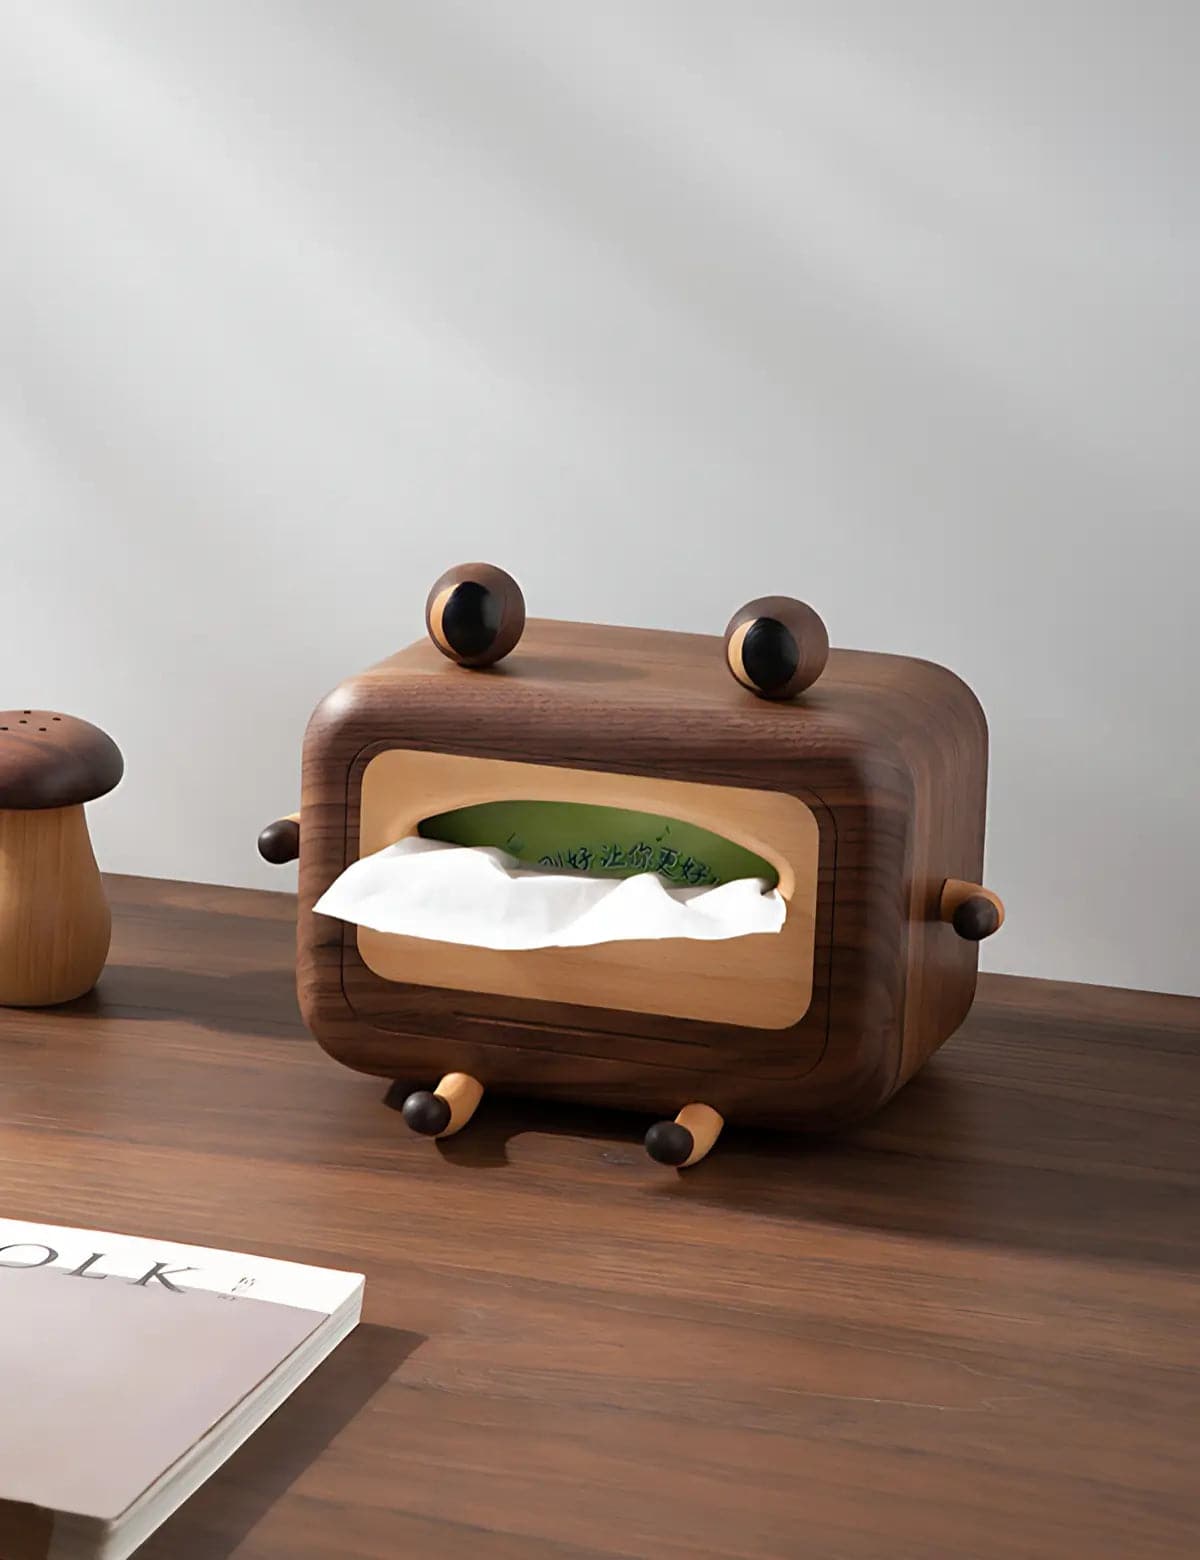 mr-frog-wooden-tissue-box-handcrafted-countertop-decor-05